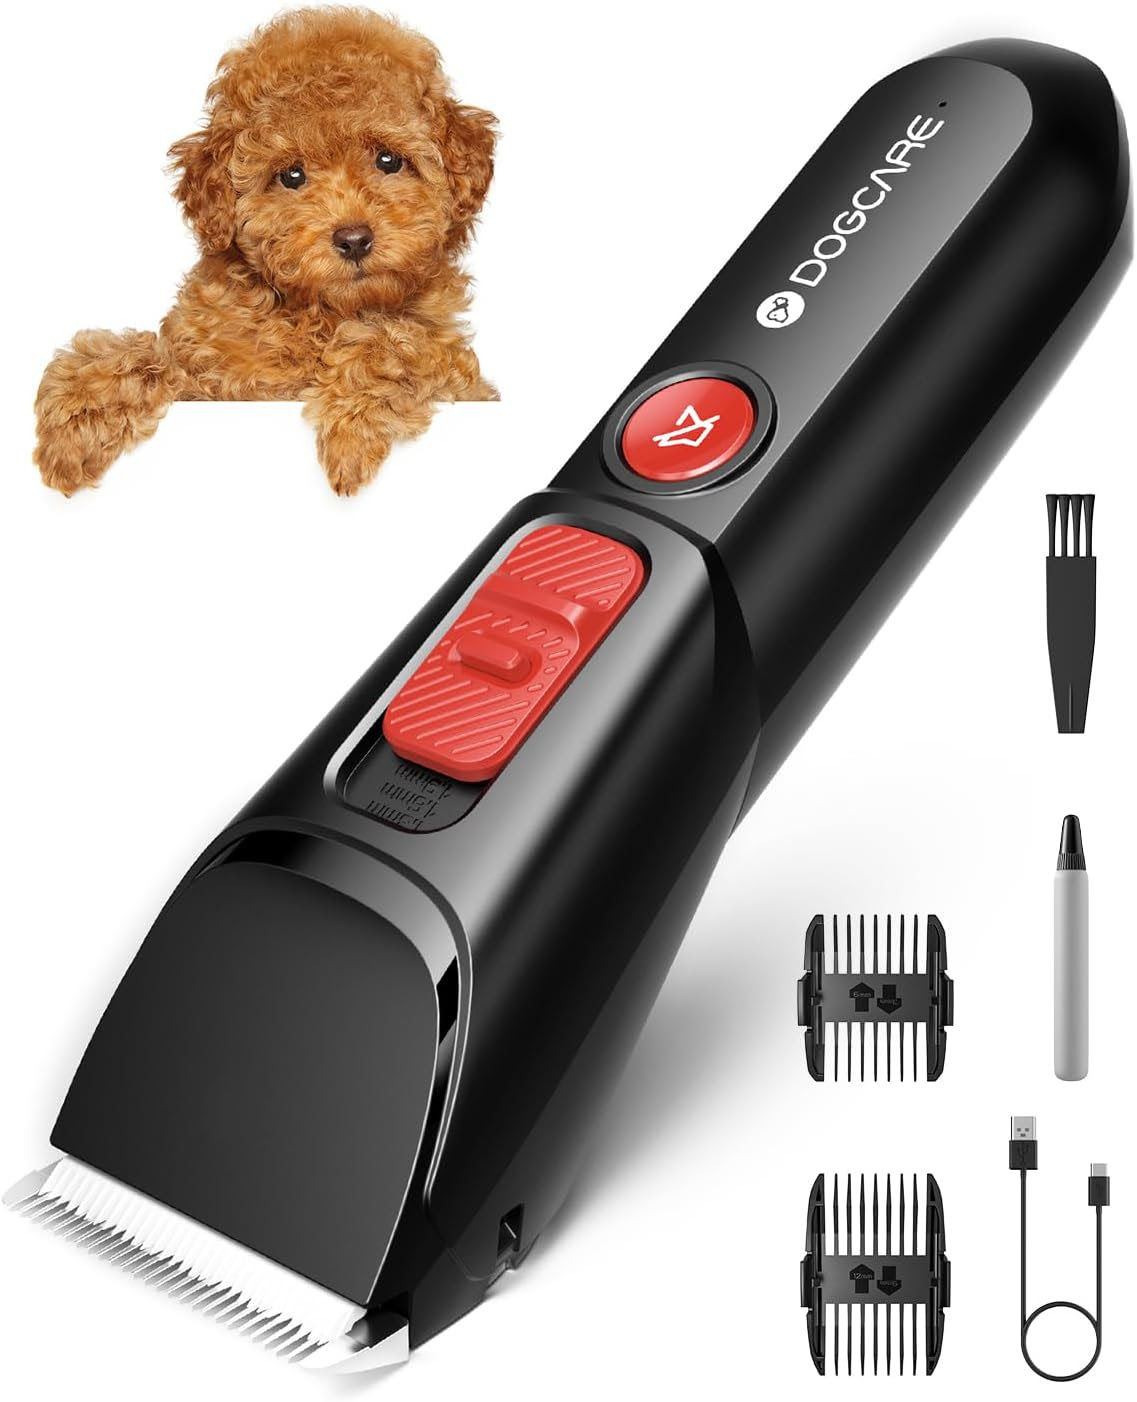 DOGCARE Cordless Rechargeable Dog Grooming Clippers. 1800units. EXW Los Angeles $7.95 unit.